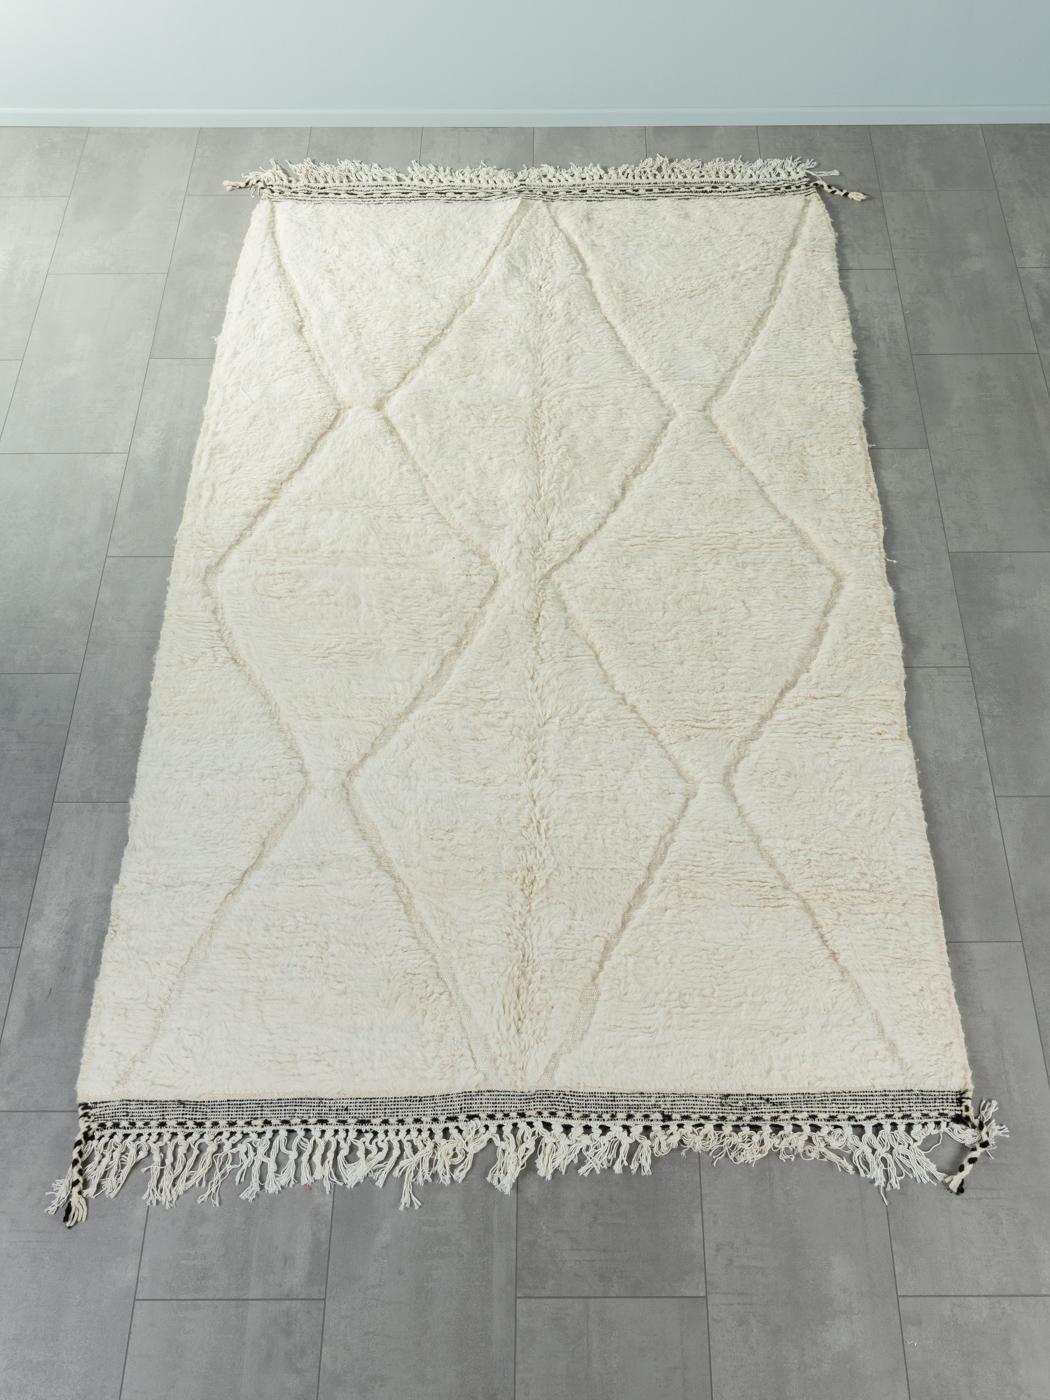 Tiny Light Beni is a contemporary 100% wool rug – thick and soft, comfortable underfoot. Our Berber rugs are handwoven and handknotted by Amazigh women in the Atlas Mountains. These communities have been crafting rugs for thousands of years. One